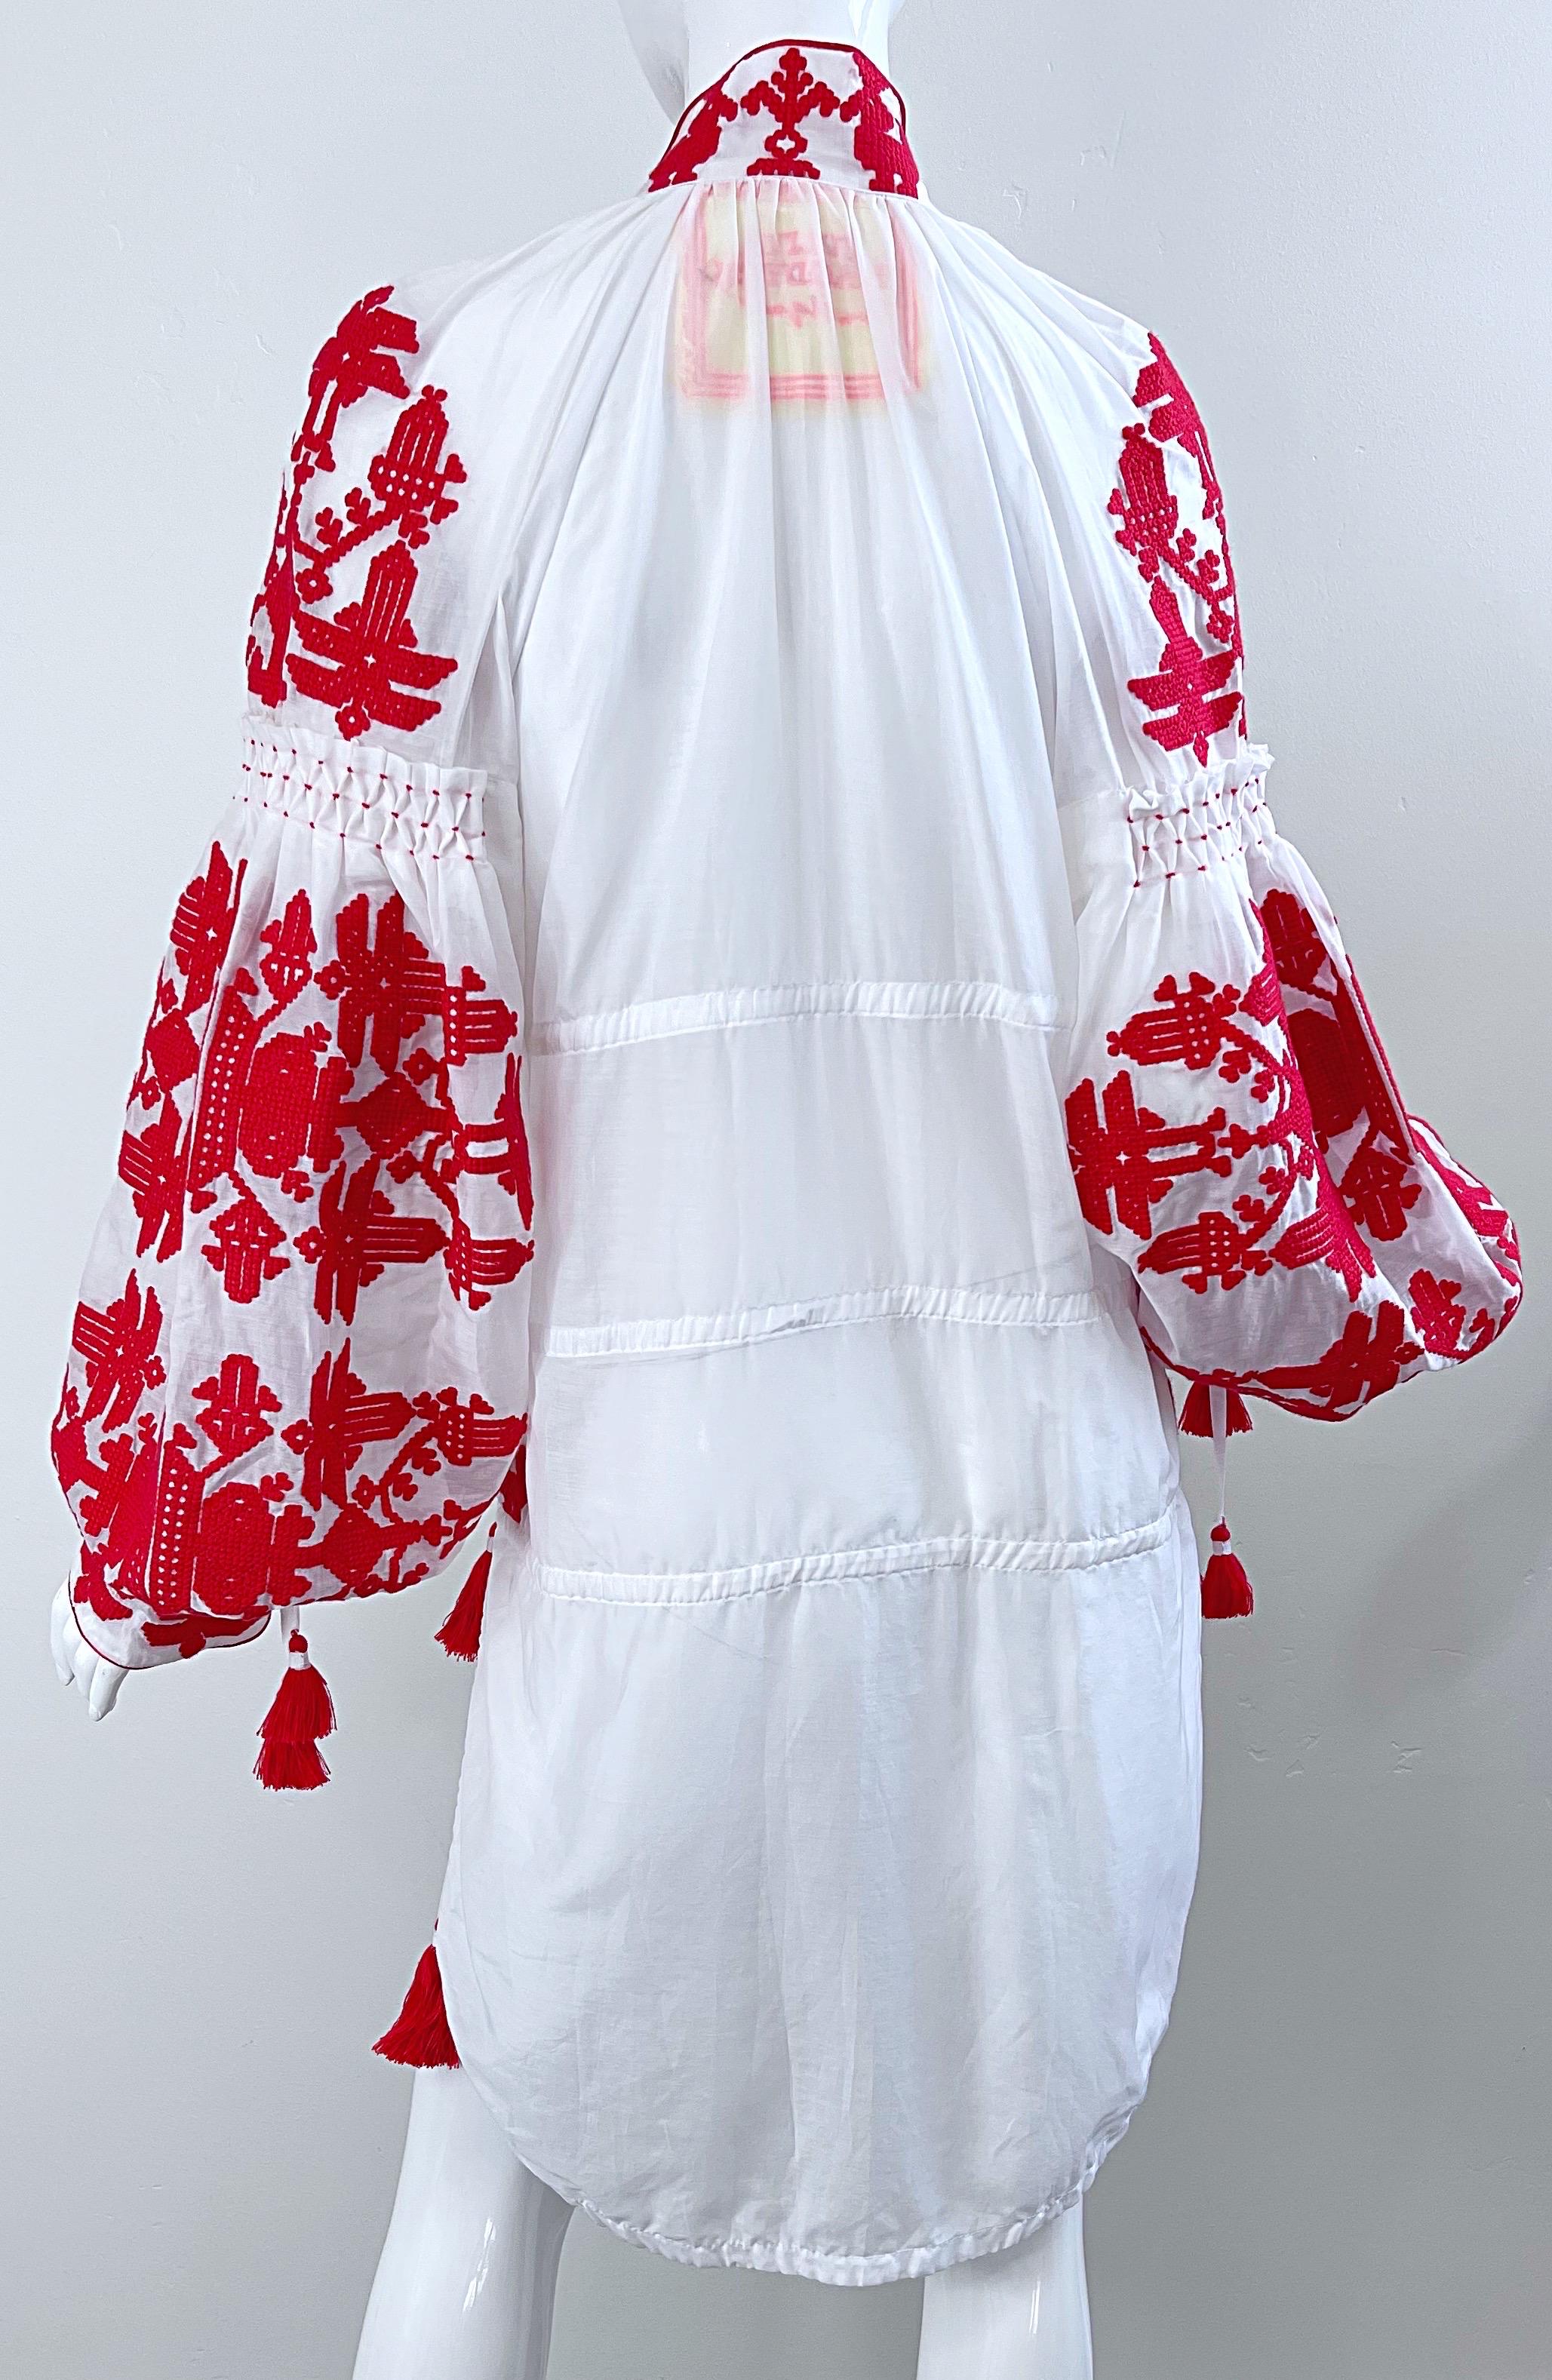 Yuliya Magdych Ukraine Designer Hand Embroidered Red White Tassel Caftan Dress In Excellent Condition For Sale In San Diego, CA